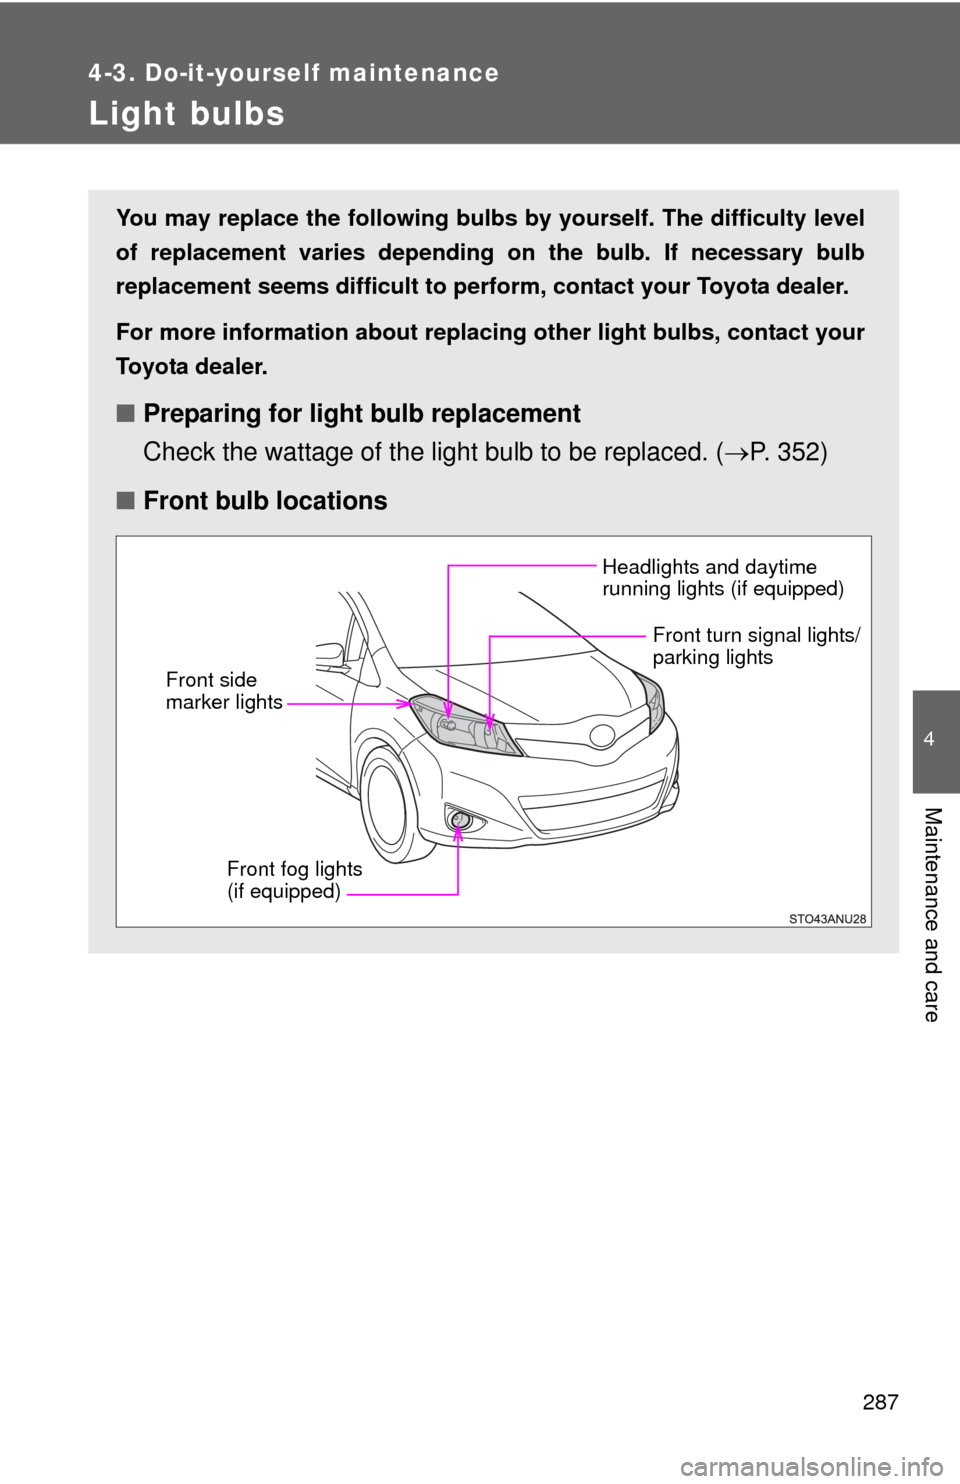 TOYOTA YARIS 2013 3.G Owners Manual 287
4-3. Do-it-yourself maintenance
4
Maintenance and care
Light bulbs
You may replace the following bulbs by yourself. The difficulty level
of replacement varies depending on the bulb. If necessary b